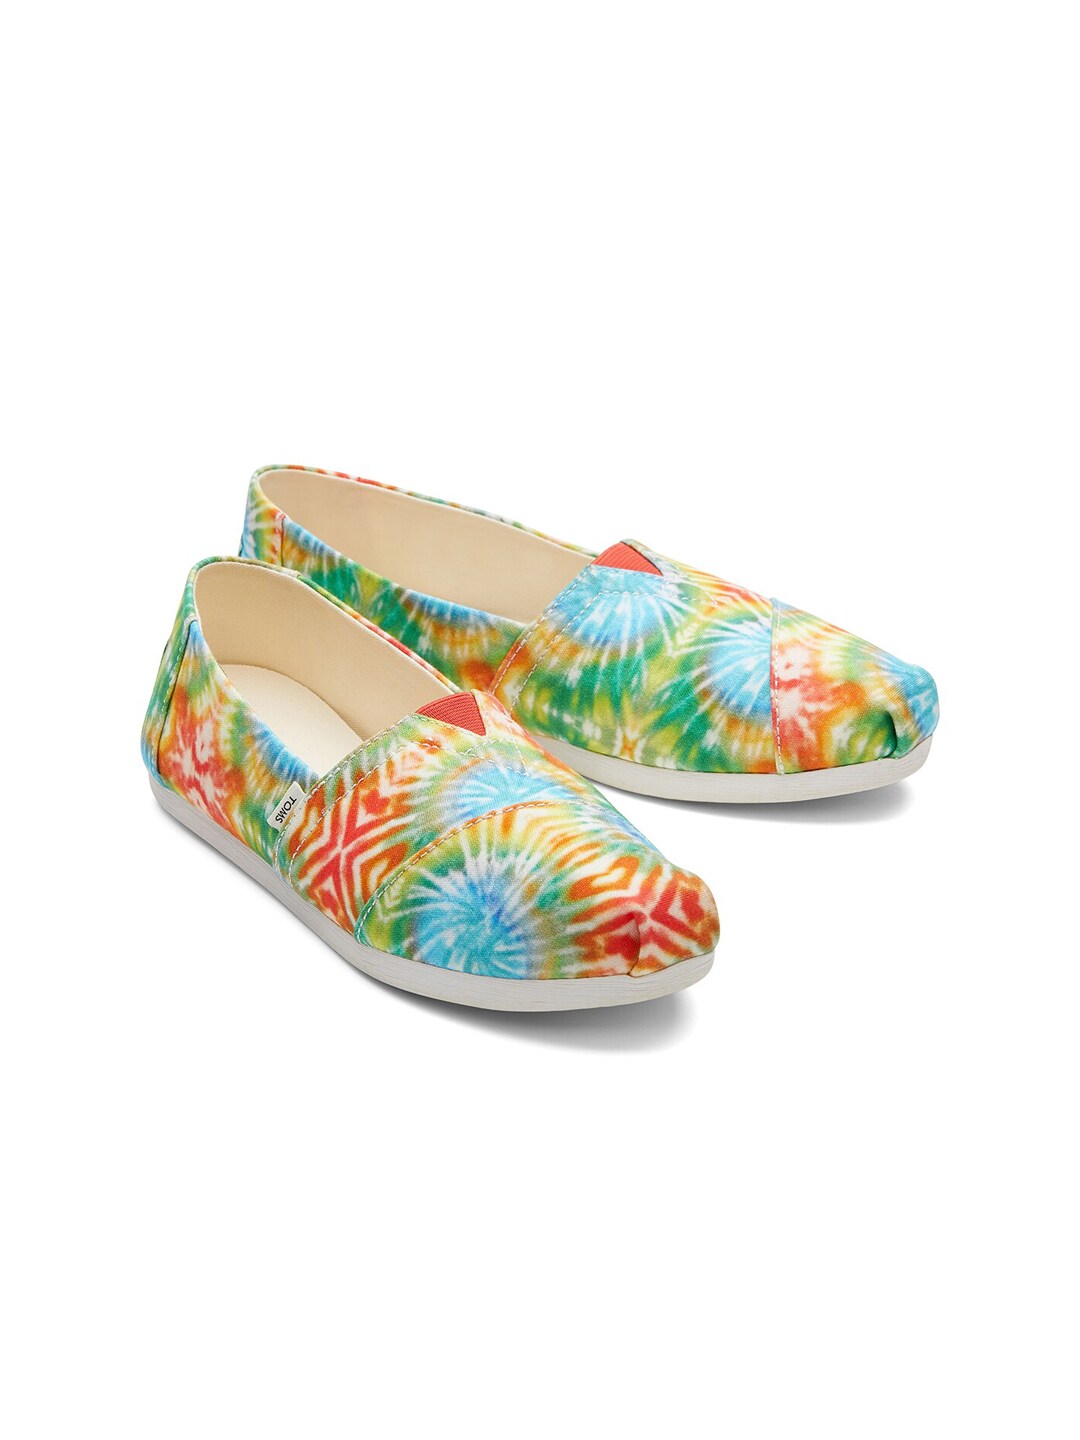 TOMS Women Red Tie & Dye Canvas Alpargata Slip-on Sneakers Price in India